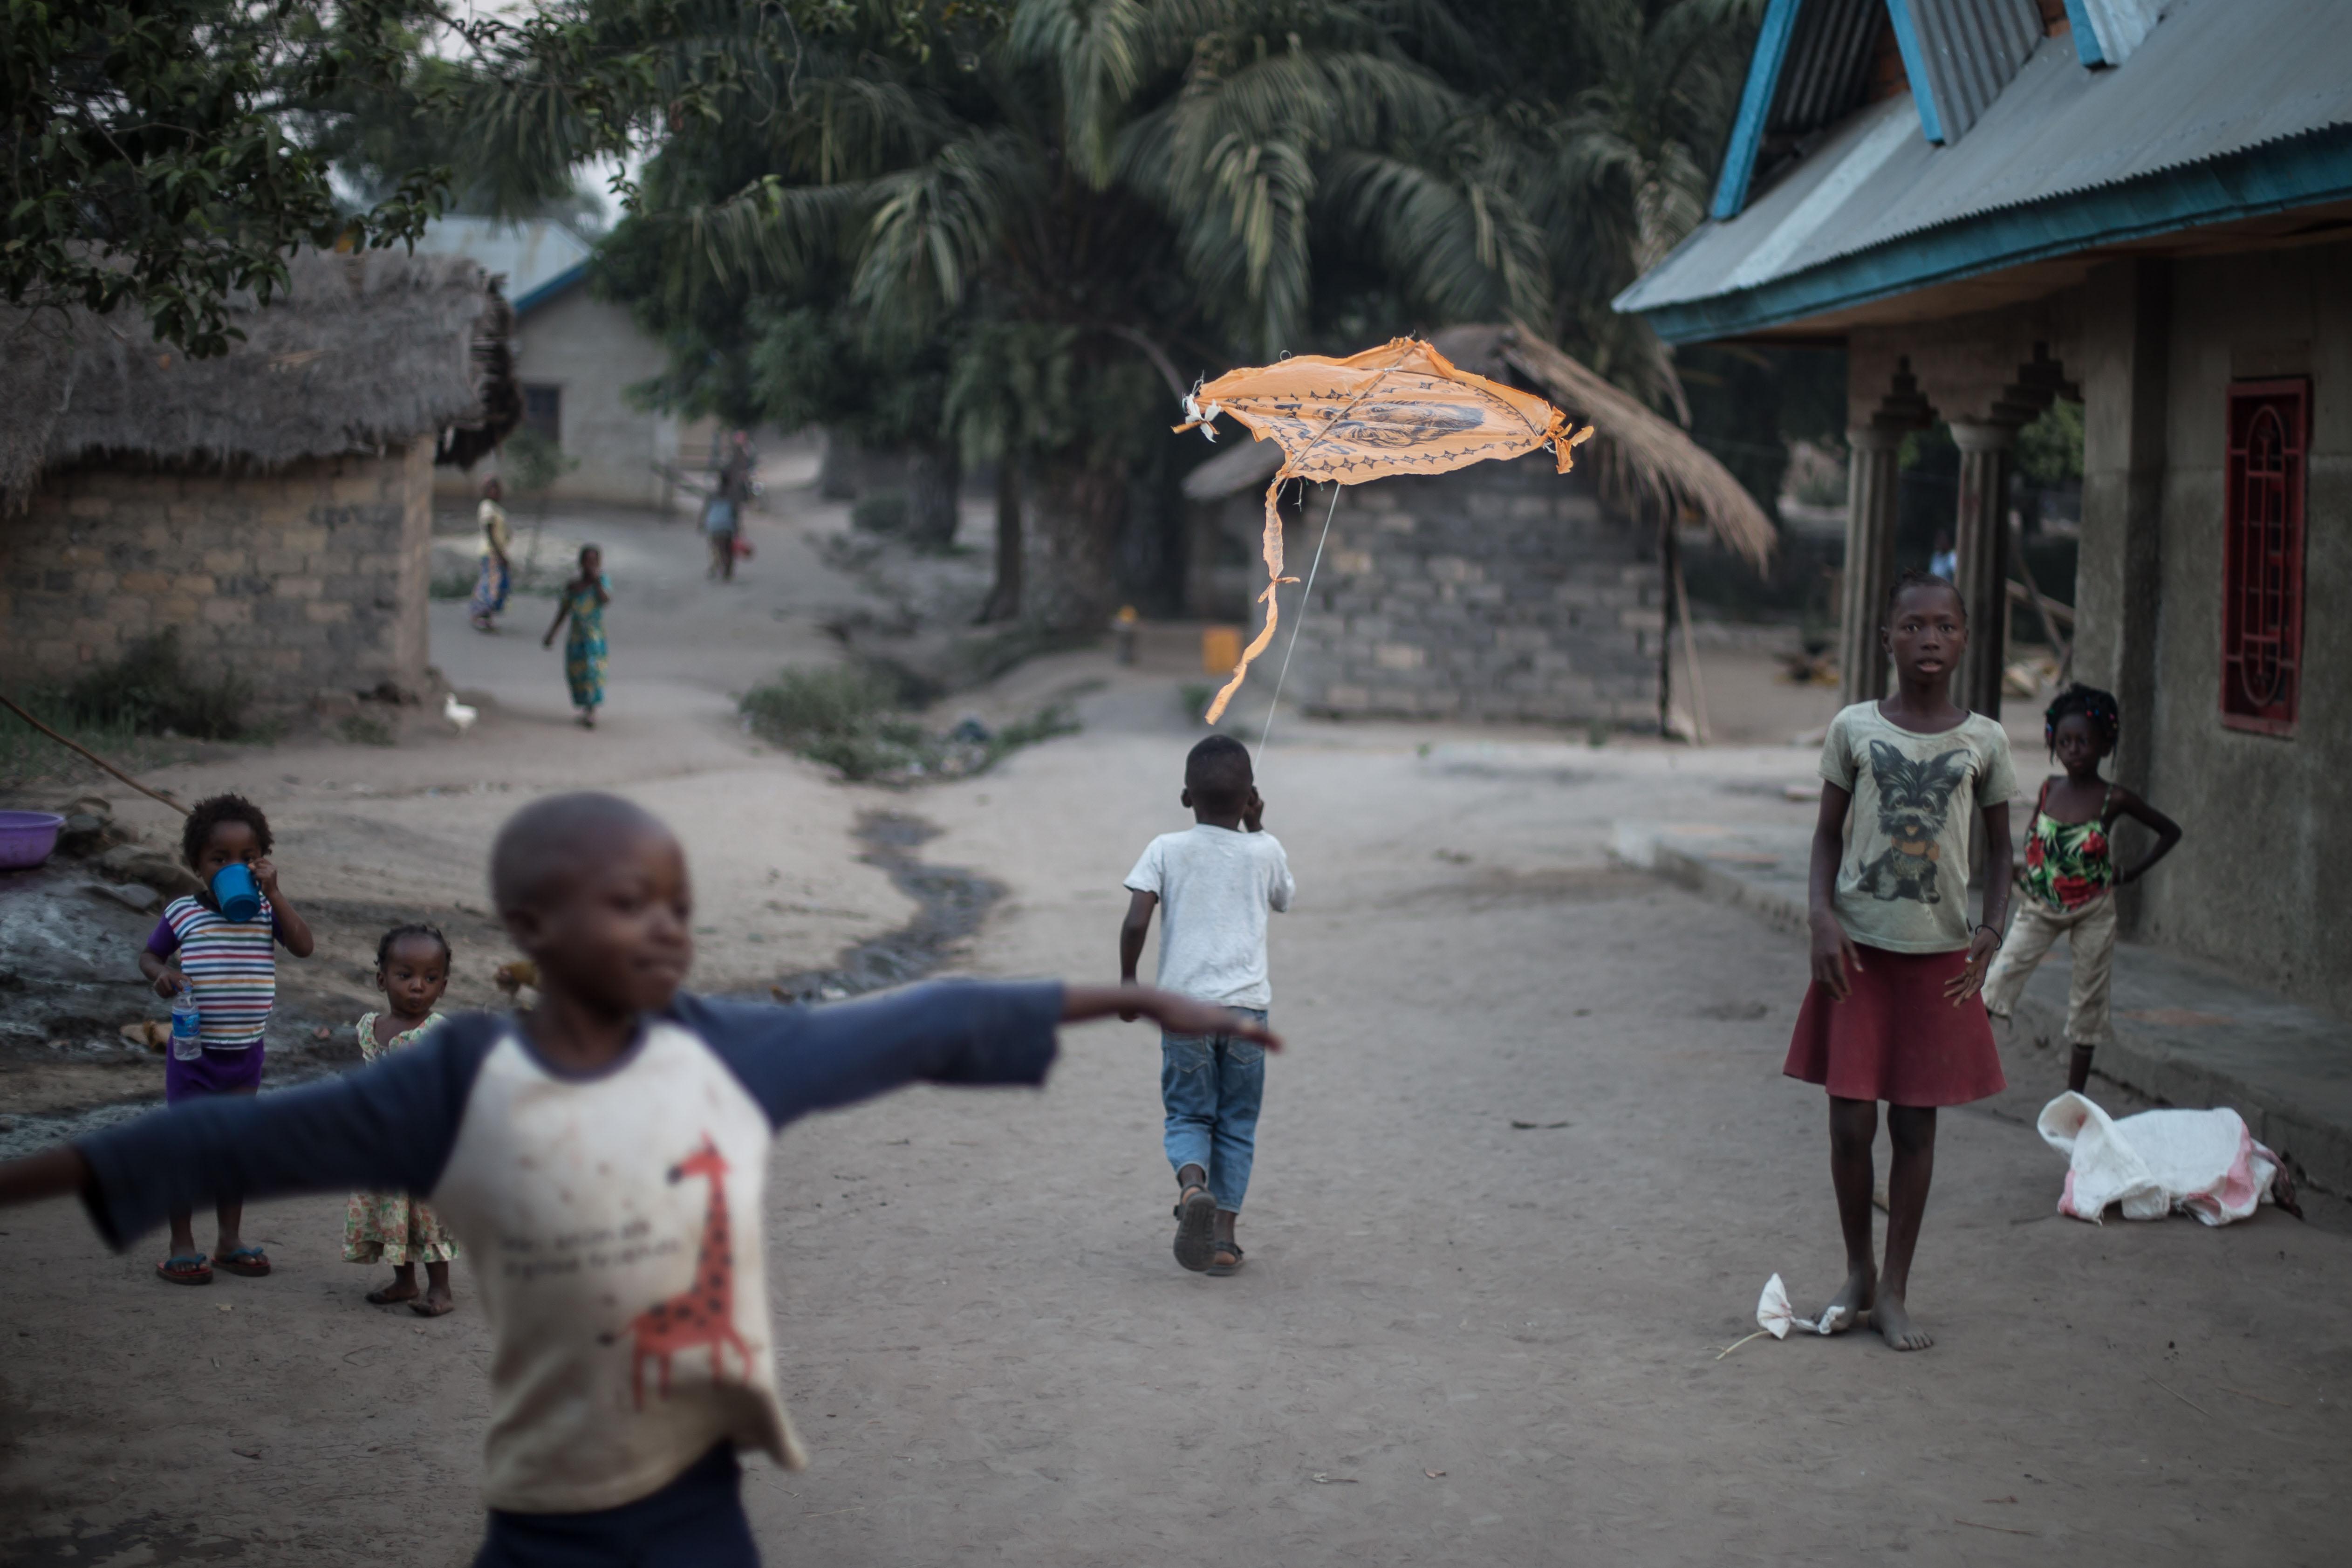 Children playing in the street, Democratic Republic of Congo